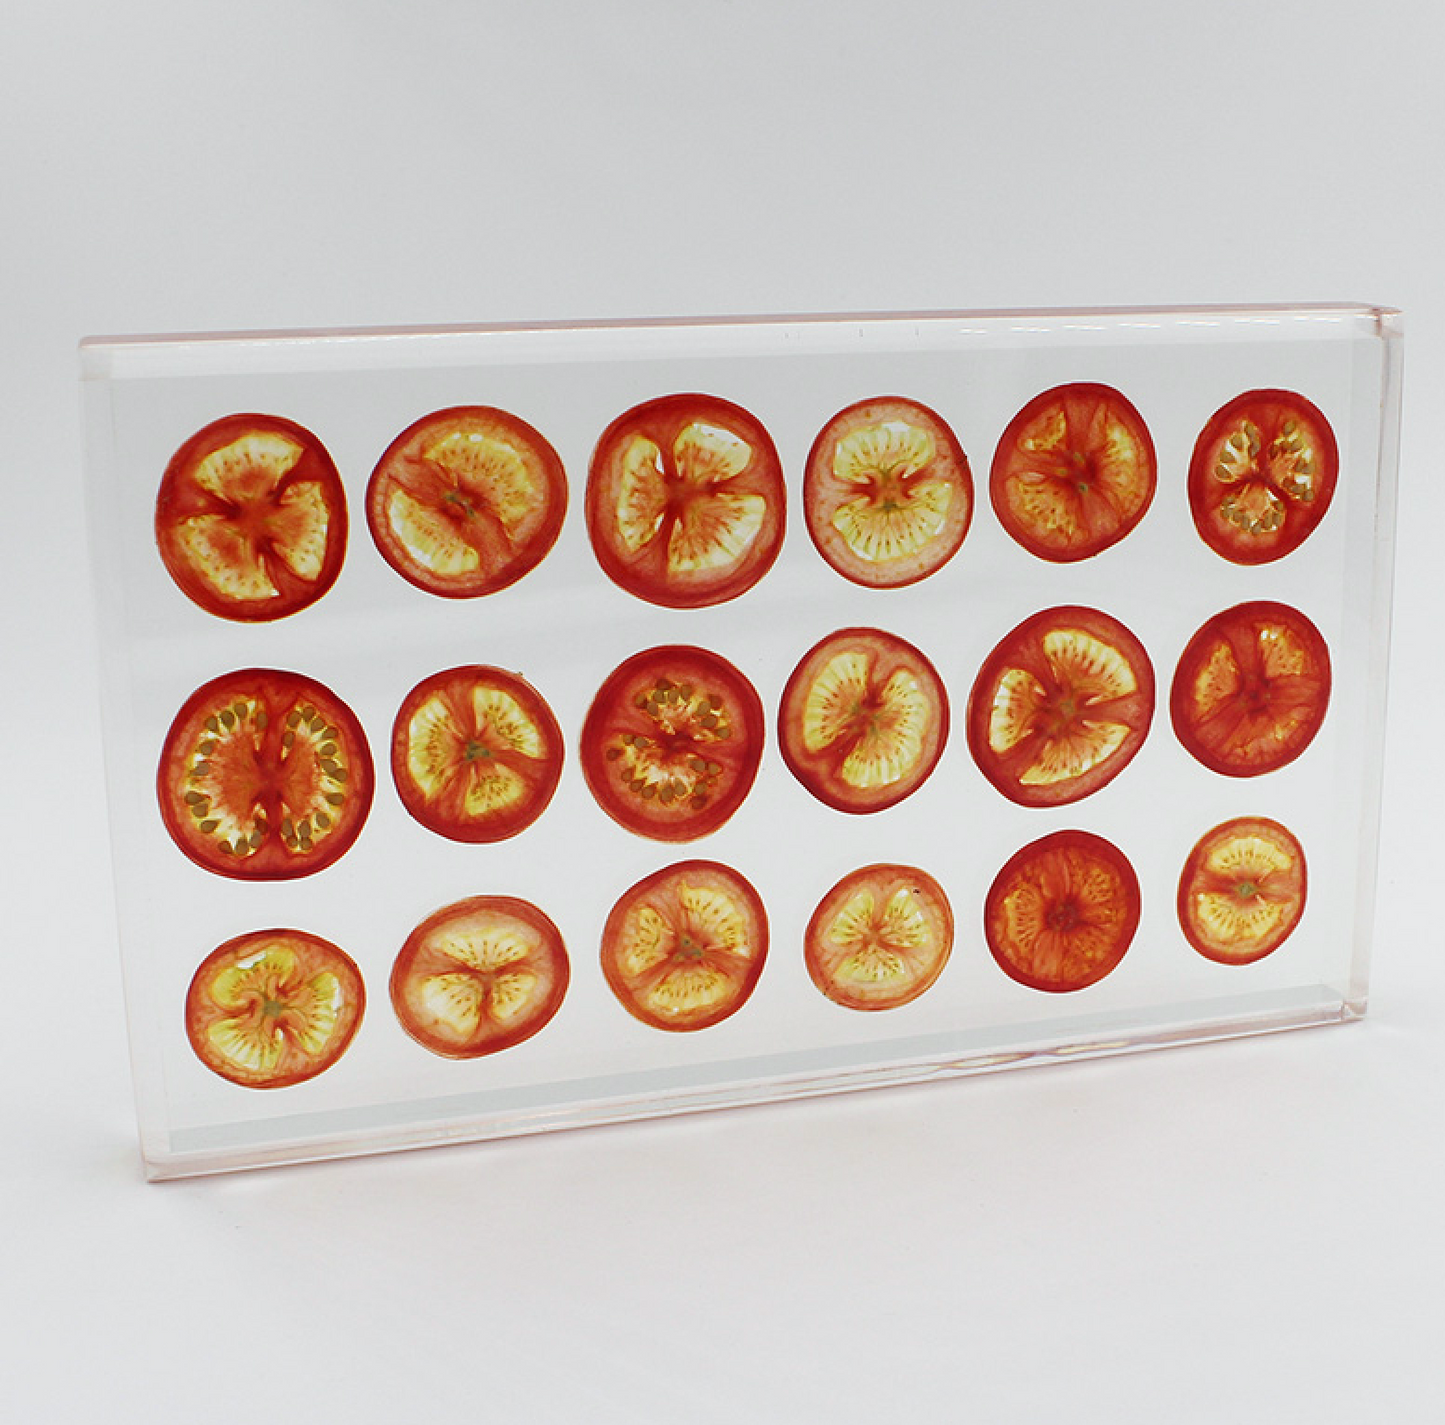 Tomatoes sit suspended in transparent resin tray